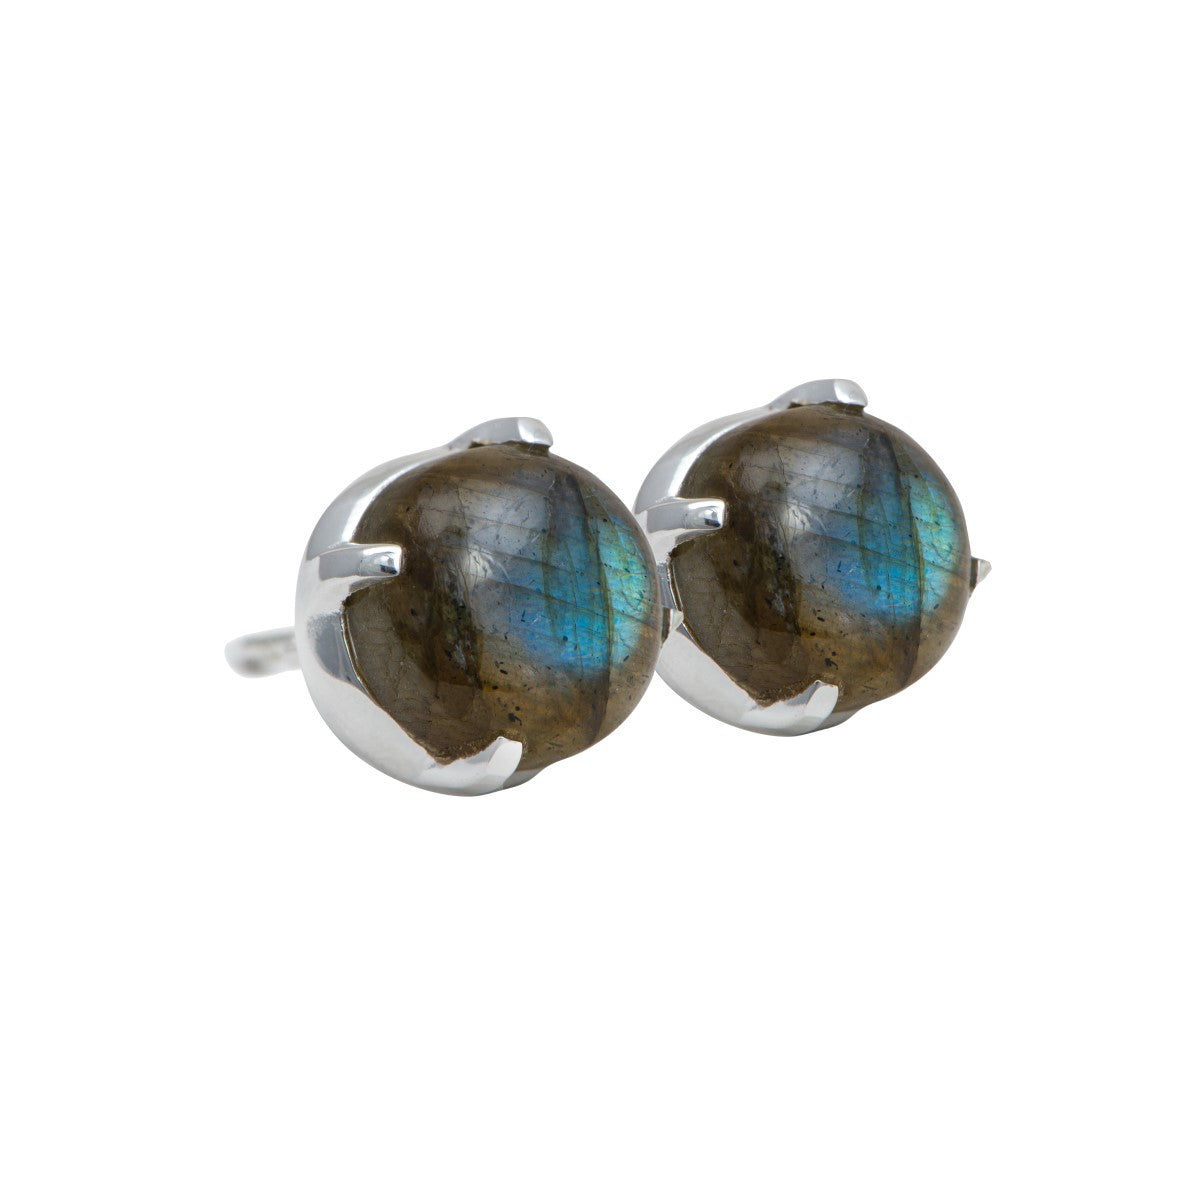 Round Cabochon Labradorite Stud Earrings in Sterling Silver